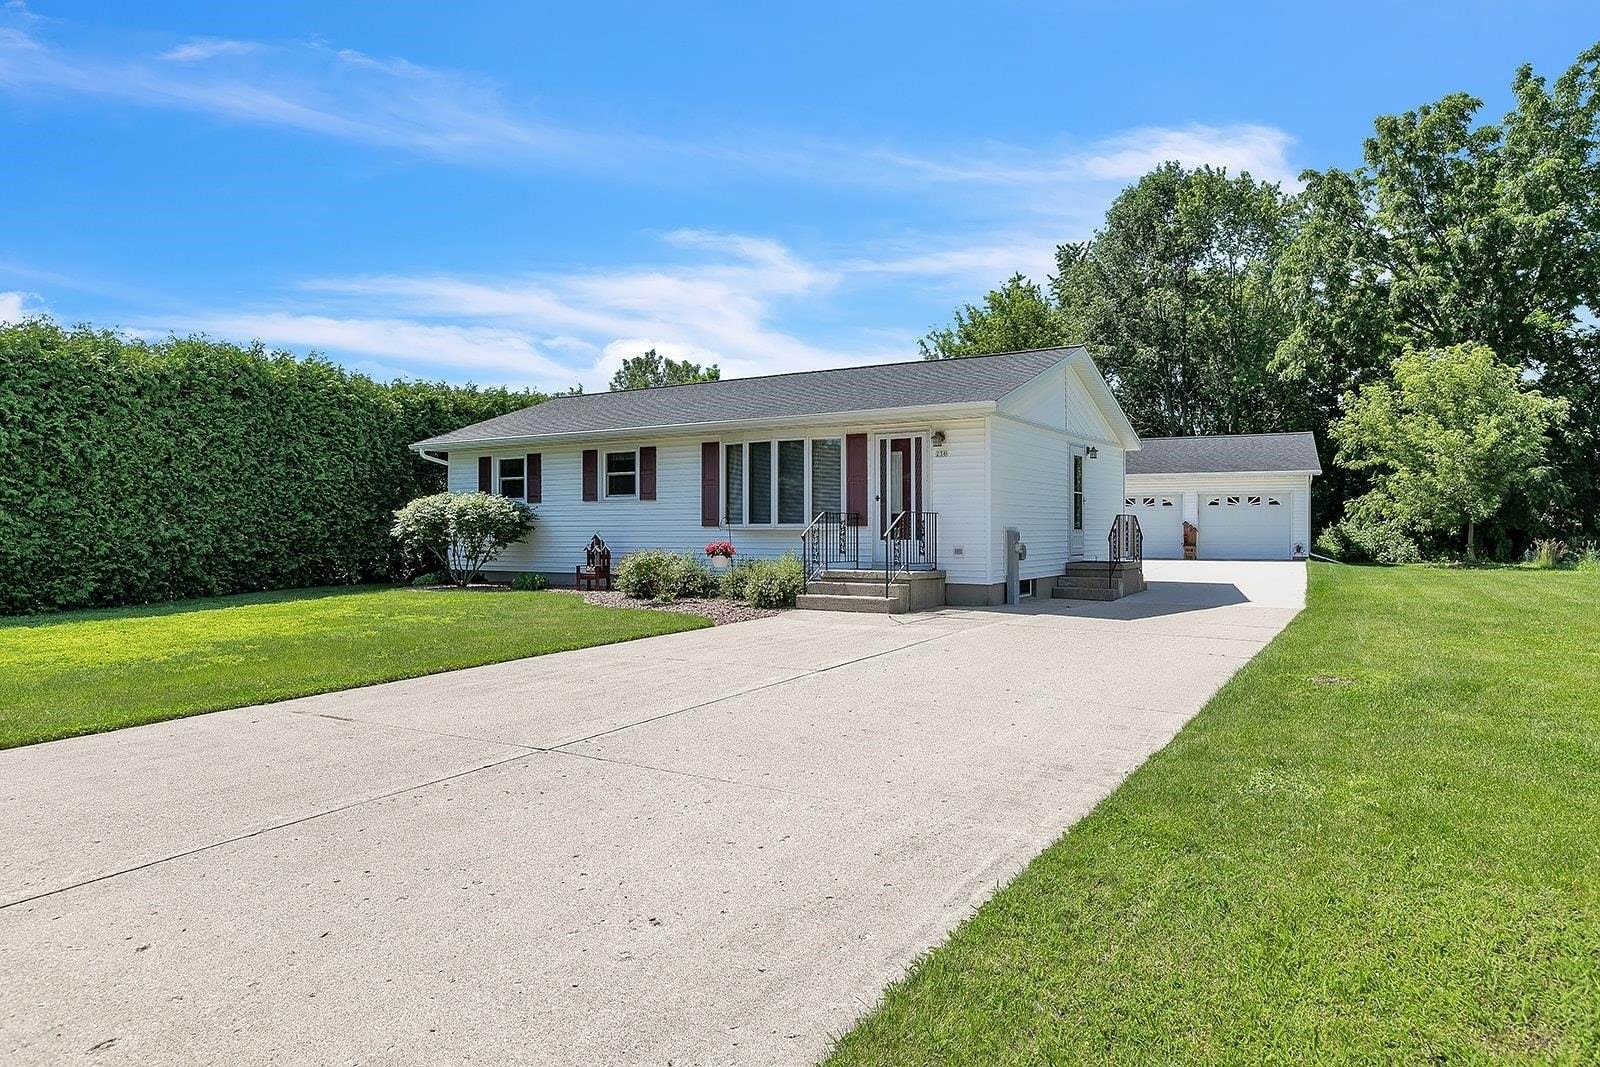 236 West Main Street, Mishicot, WI 54228